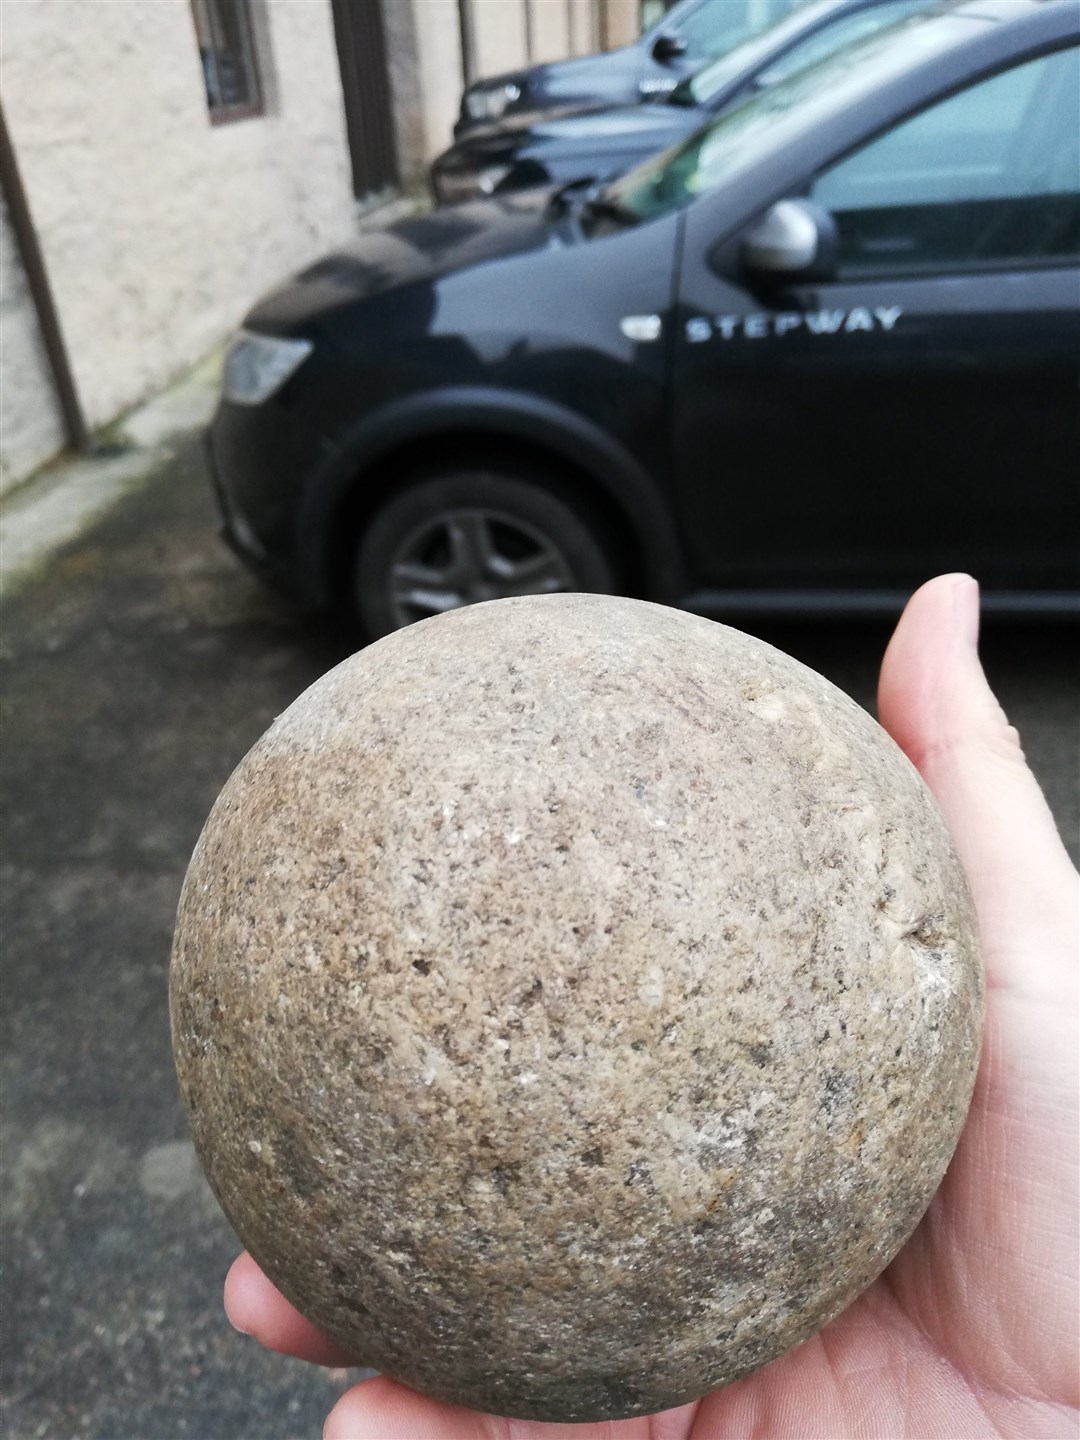 Photo shot: the cannonball Neil found.